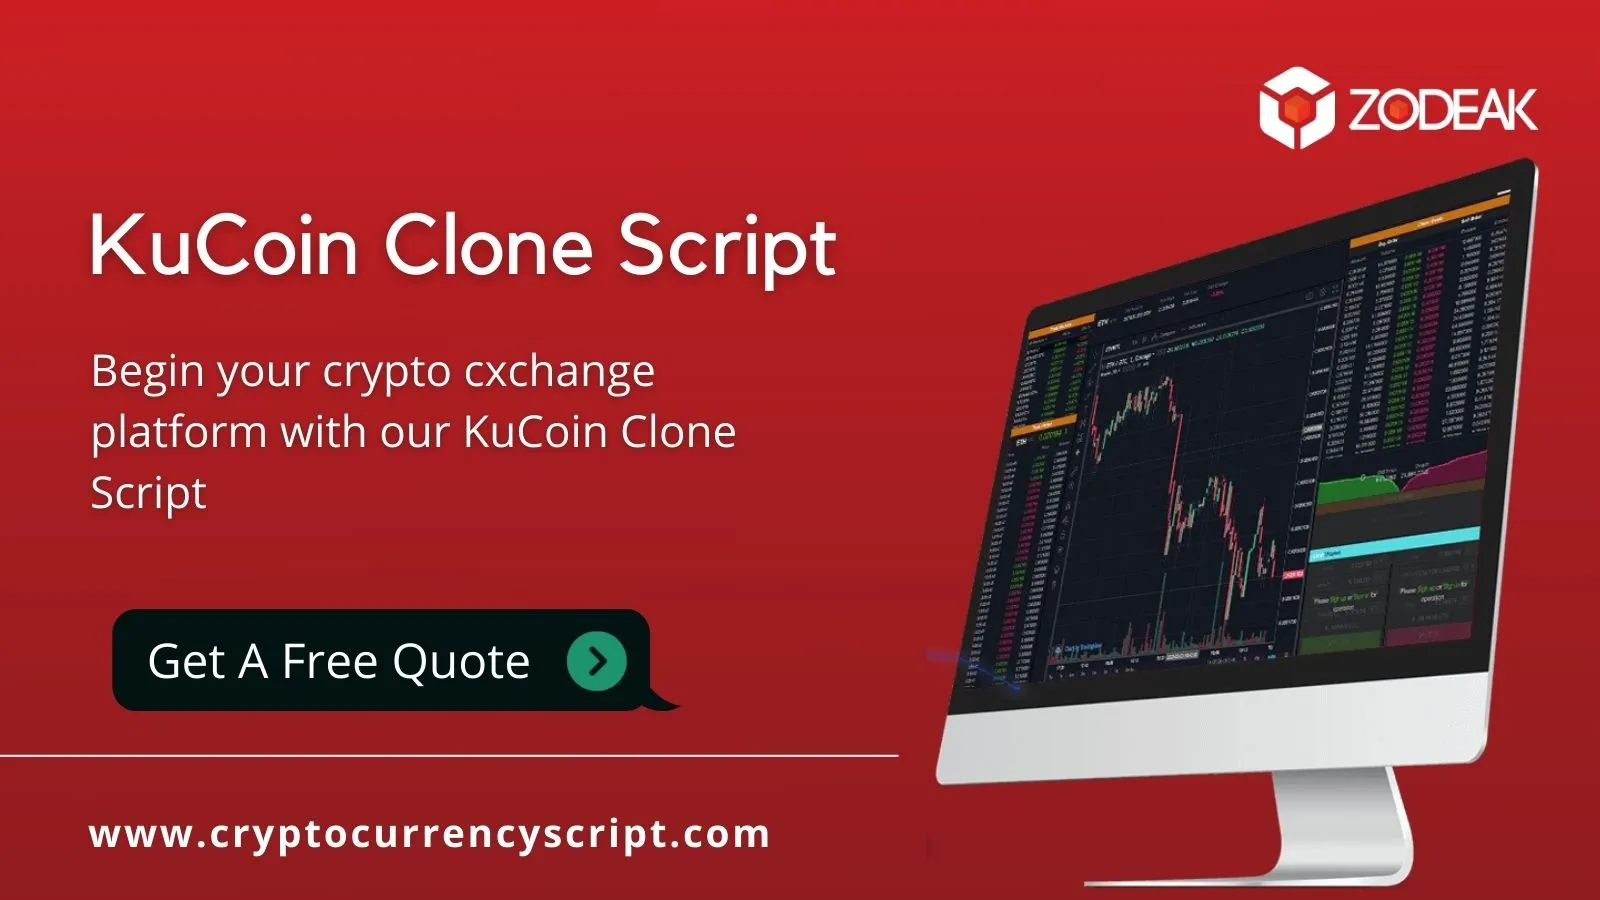 What is KuCoin?